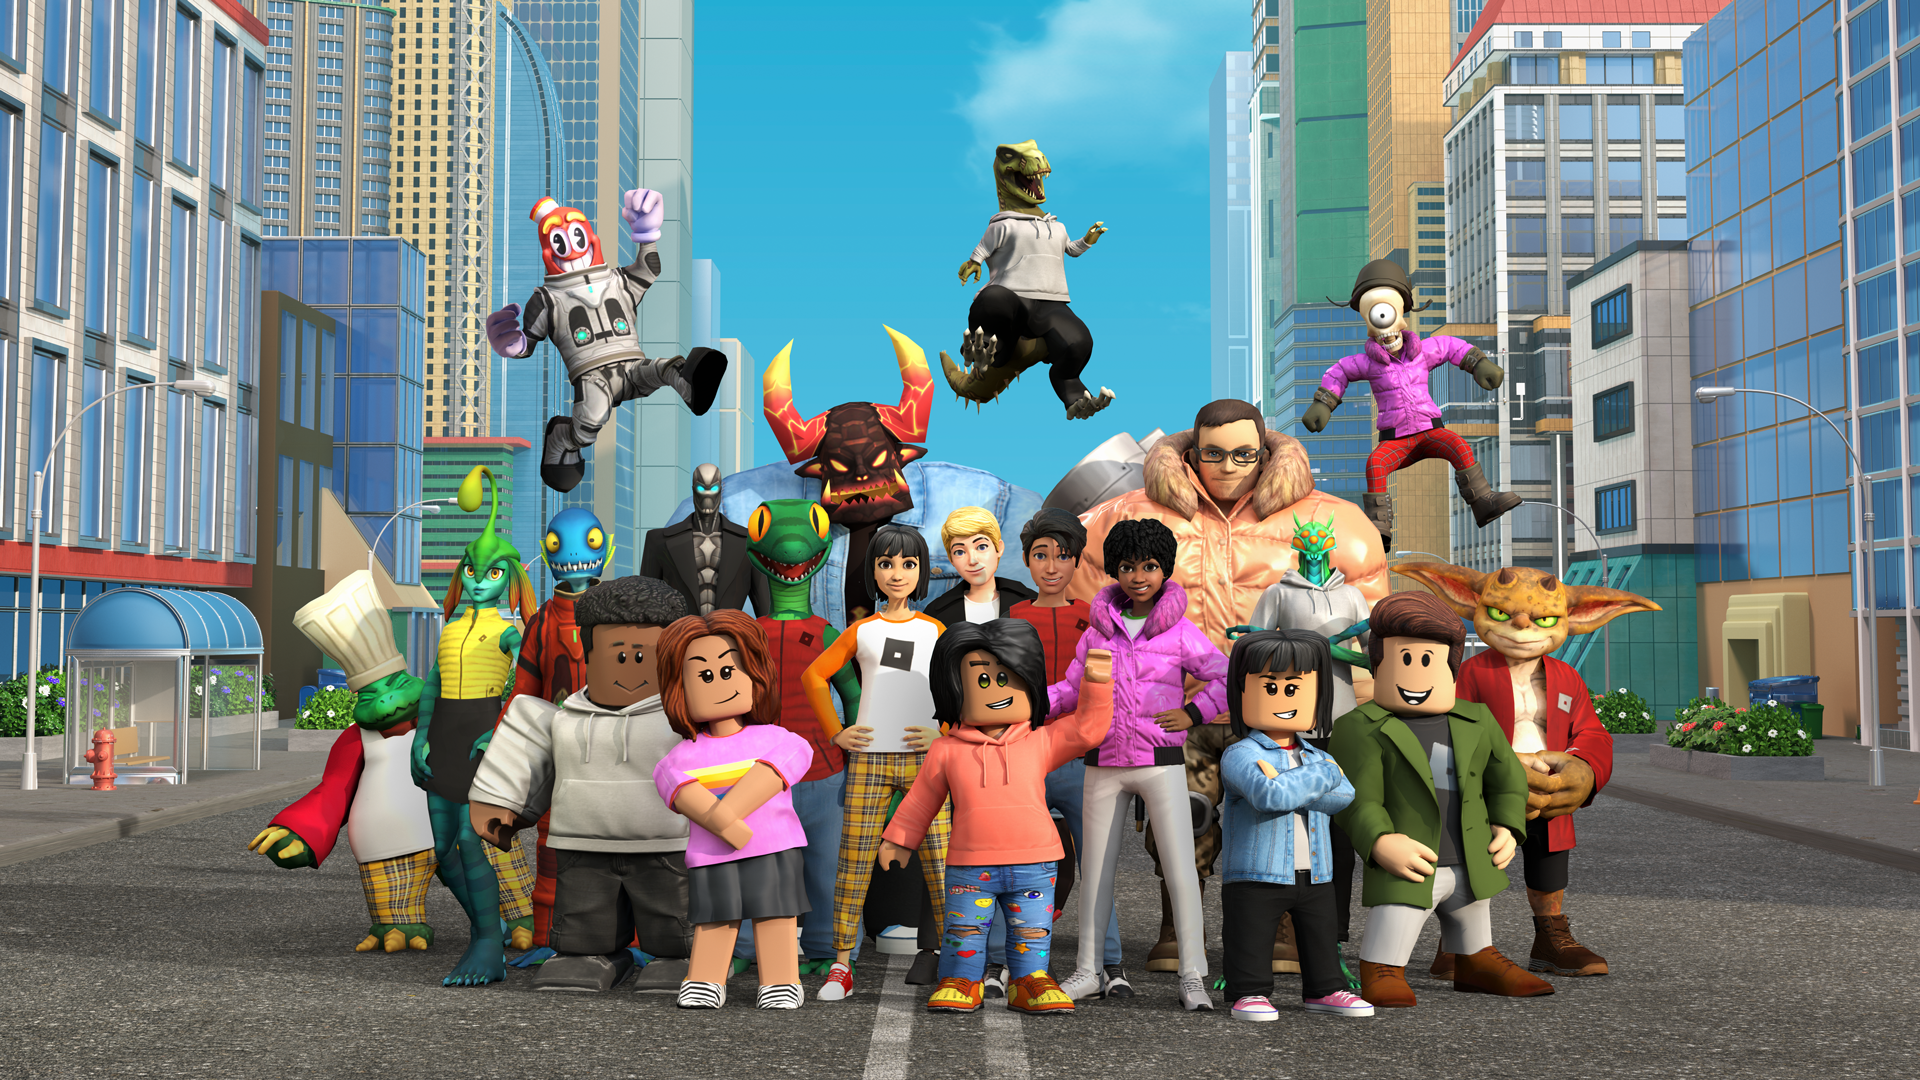 Multiple Roblox characters standing in a street